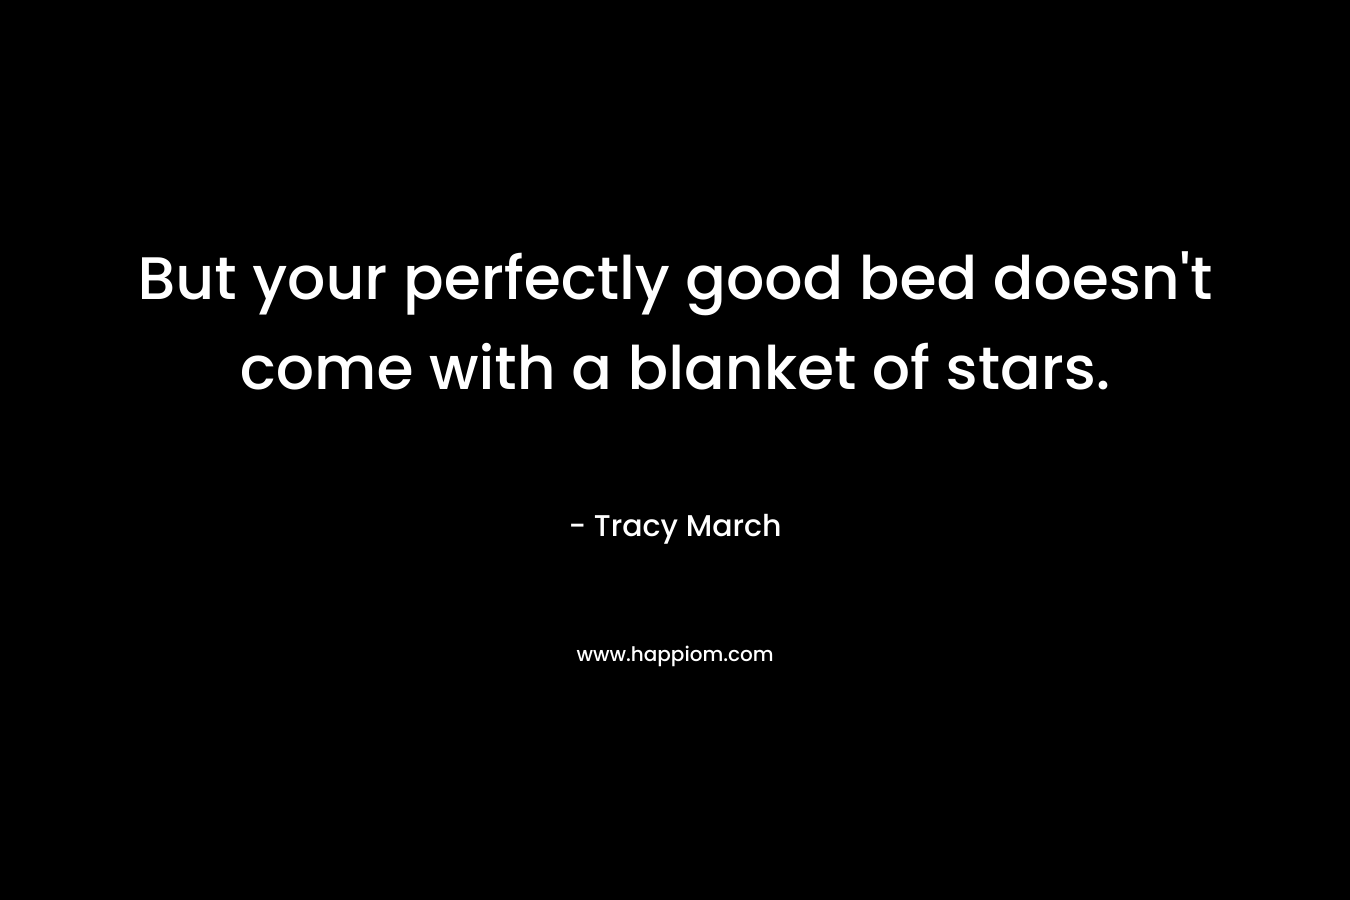 But your perfectly good bed doesn't come with a blanket of stars.